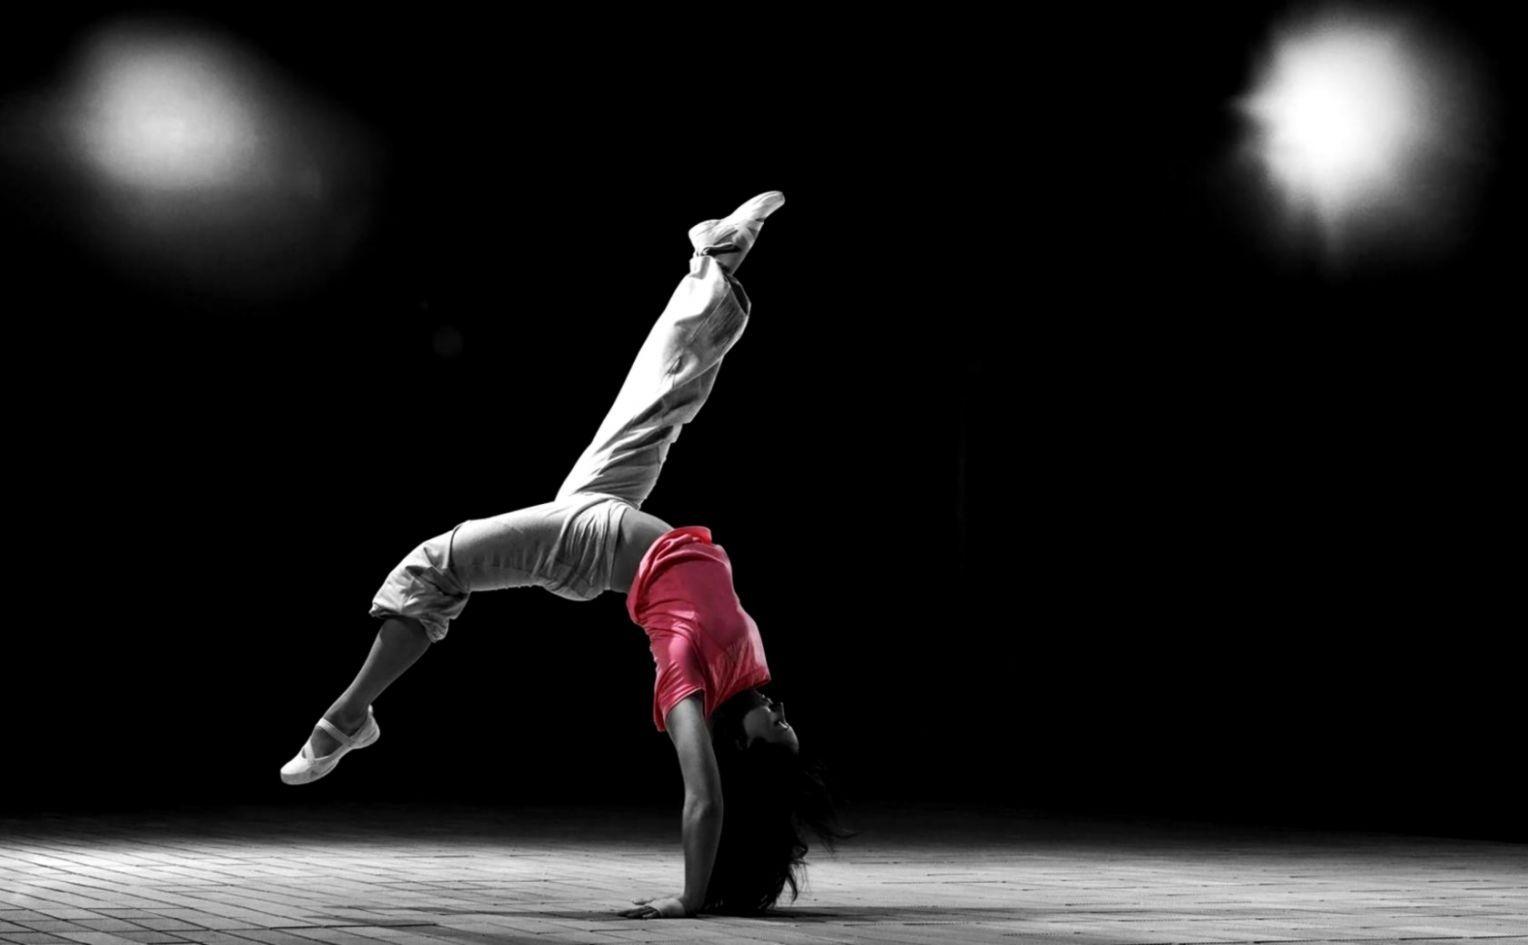 HD Wallpapers Contemporary Dance - Wallpaper Cave